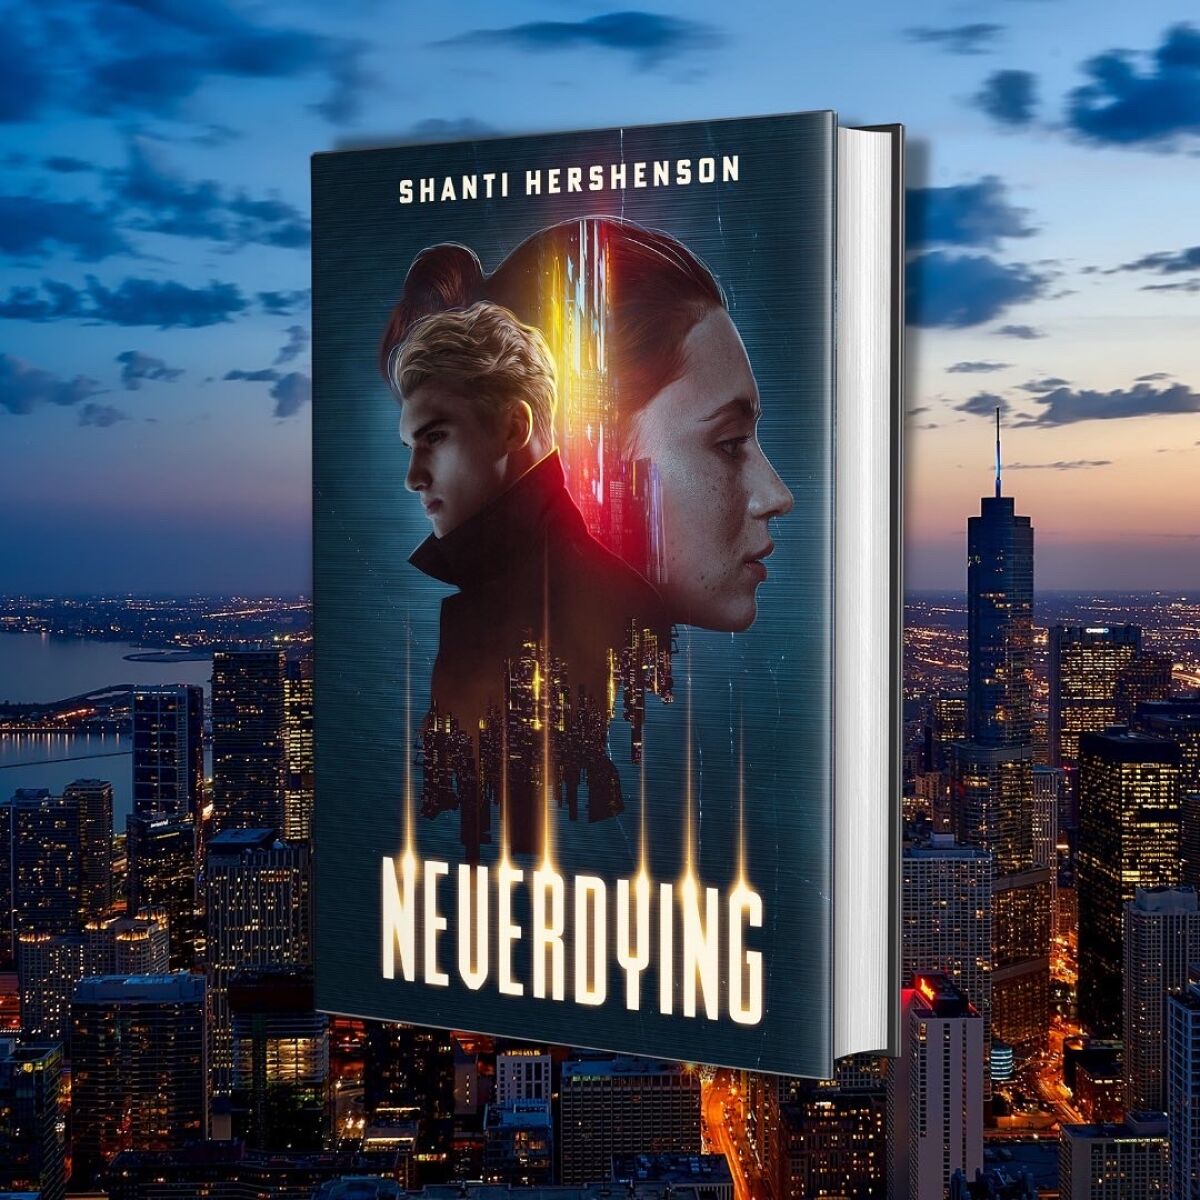 "Neverdying" is the 11th book by 14-year-old Shanti Hershenson.